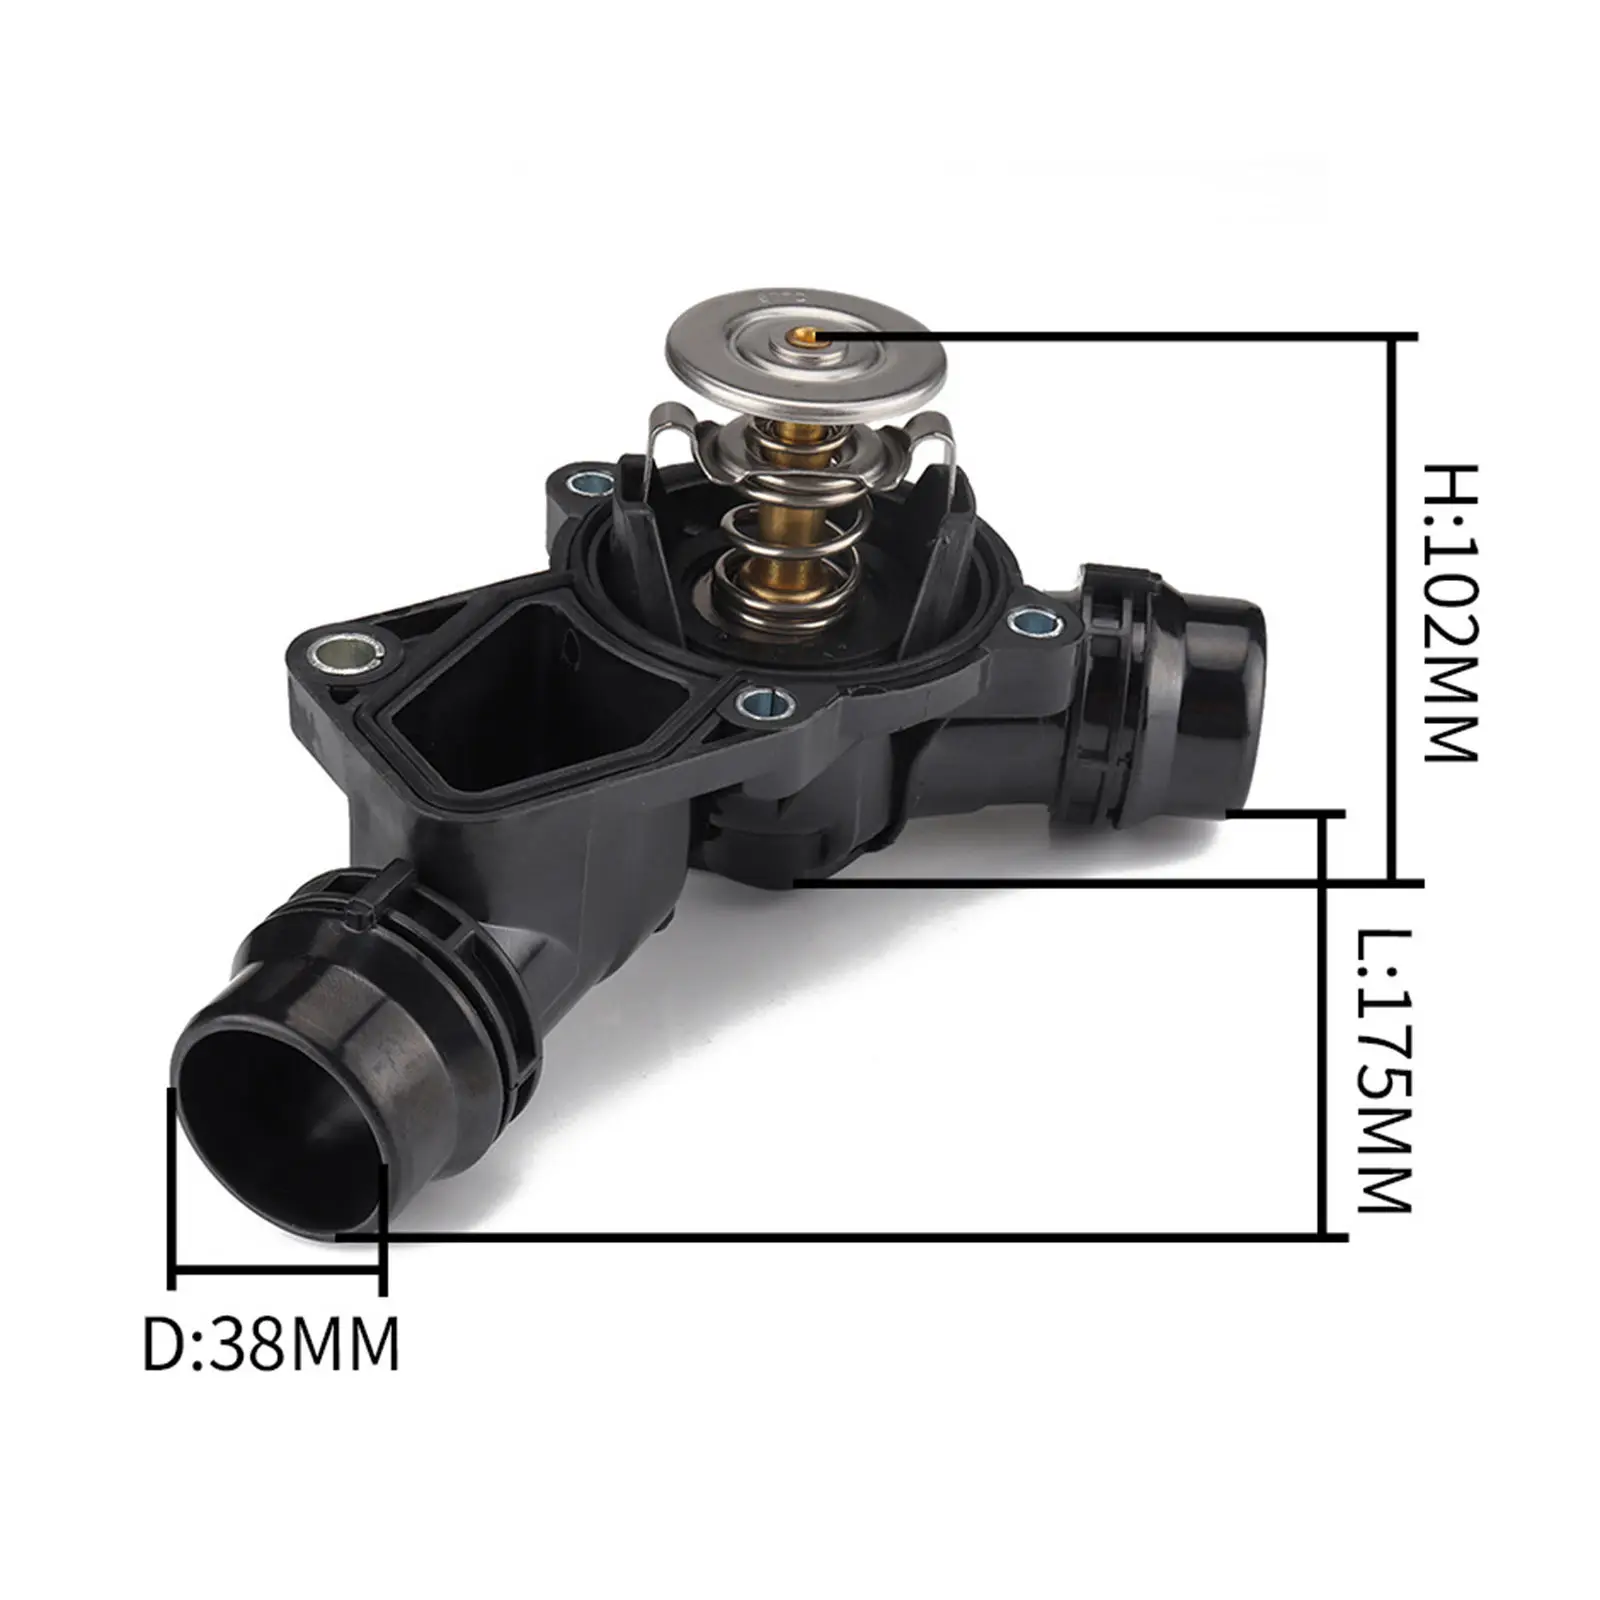 Car Thermostat Assembly with Housing For BMW E46 E39 Z3 Z4 11531437040 11531436823 11534509763 1430825 256101 432697D